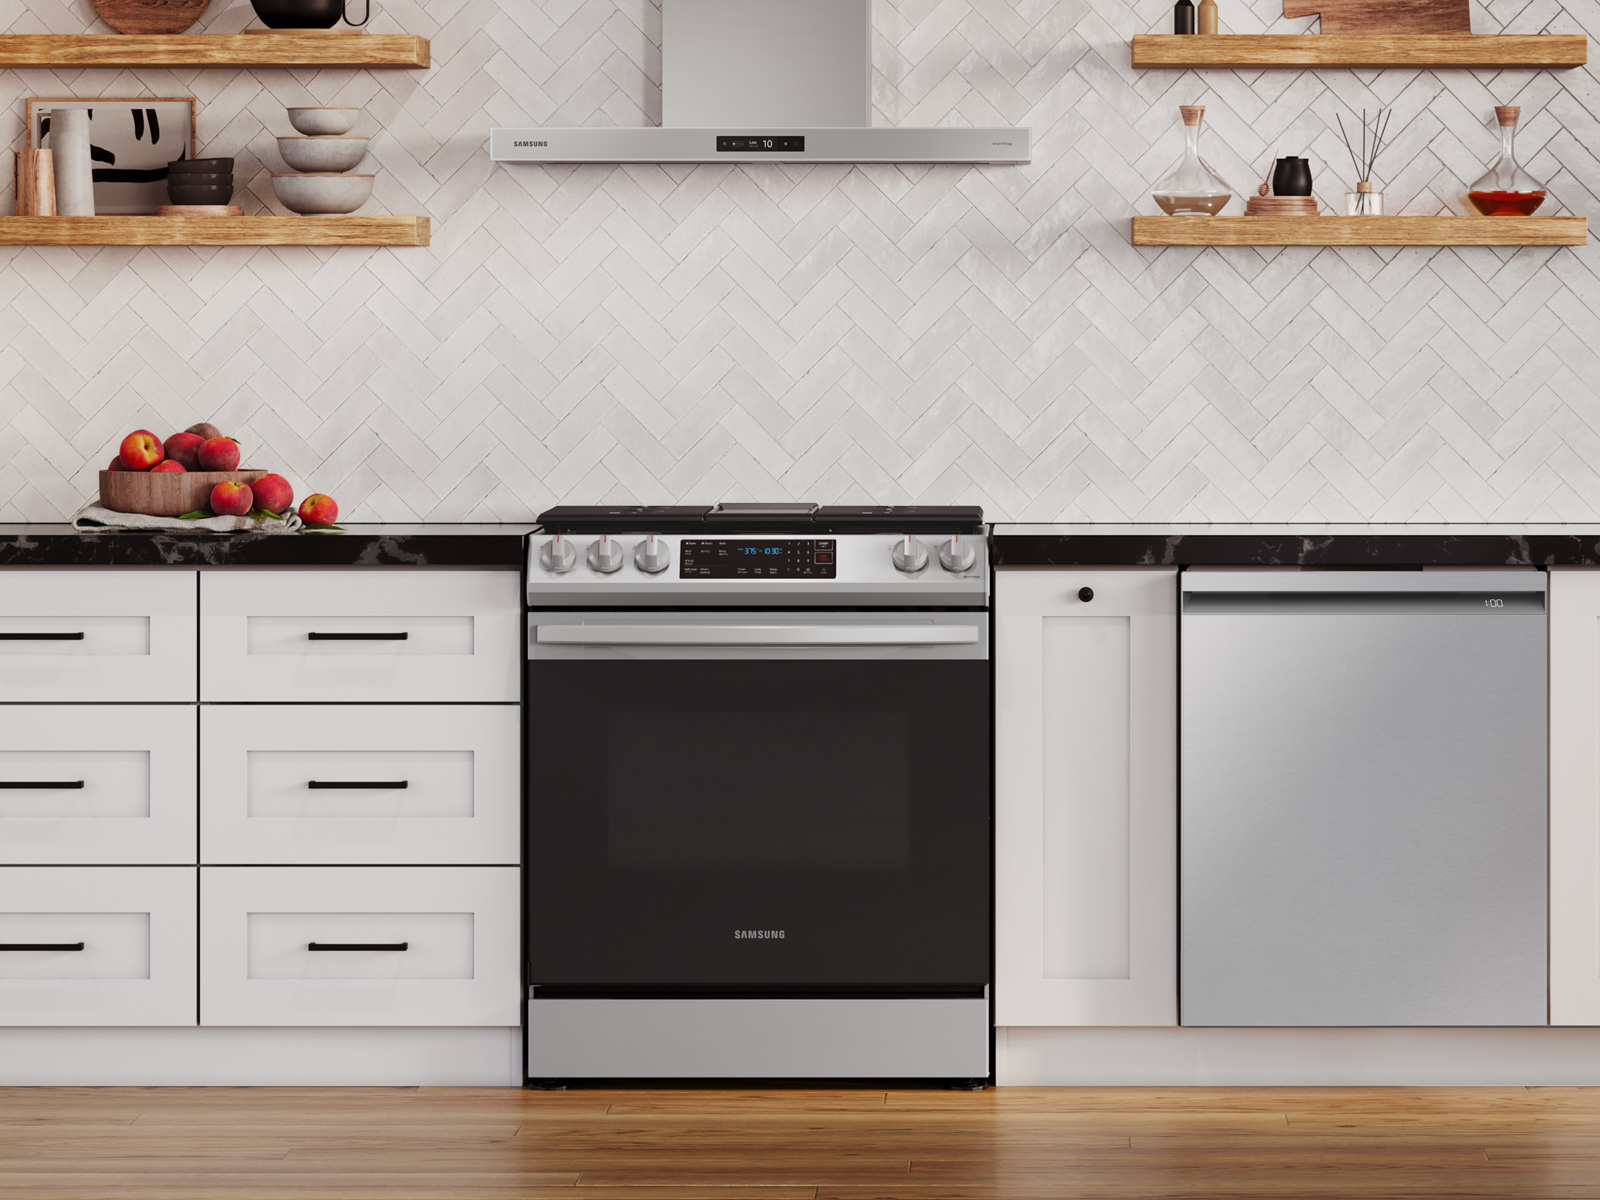 Thumbnail image of 6.0 cu. ft. Smart Slide-in Gas Range with Air Fry & Convection in Fingerprint Resistant Stainless Steel